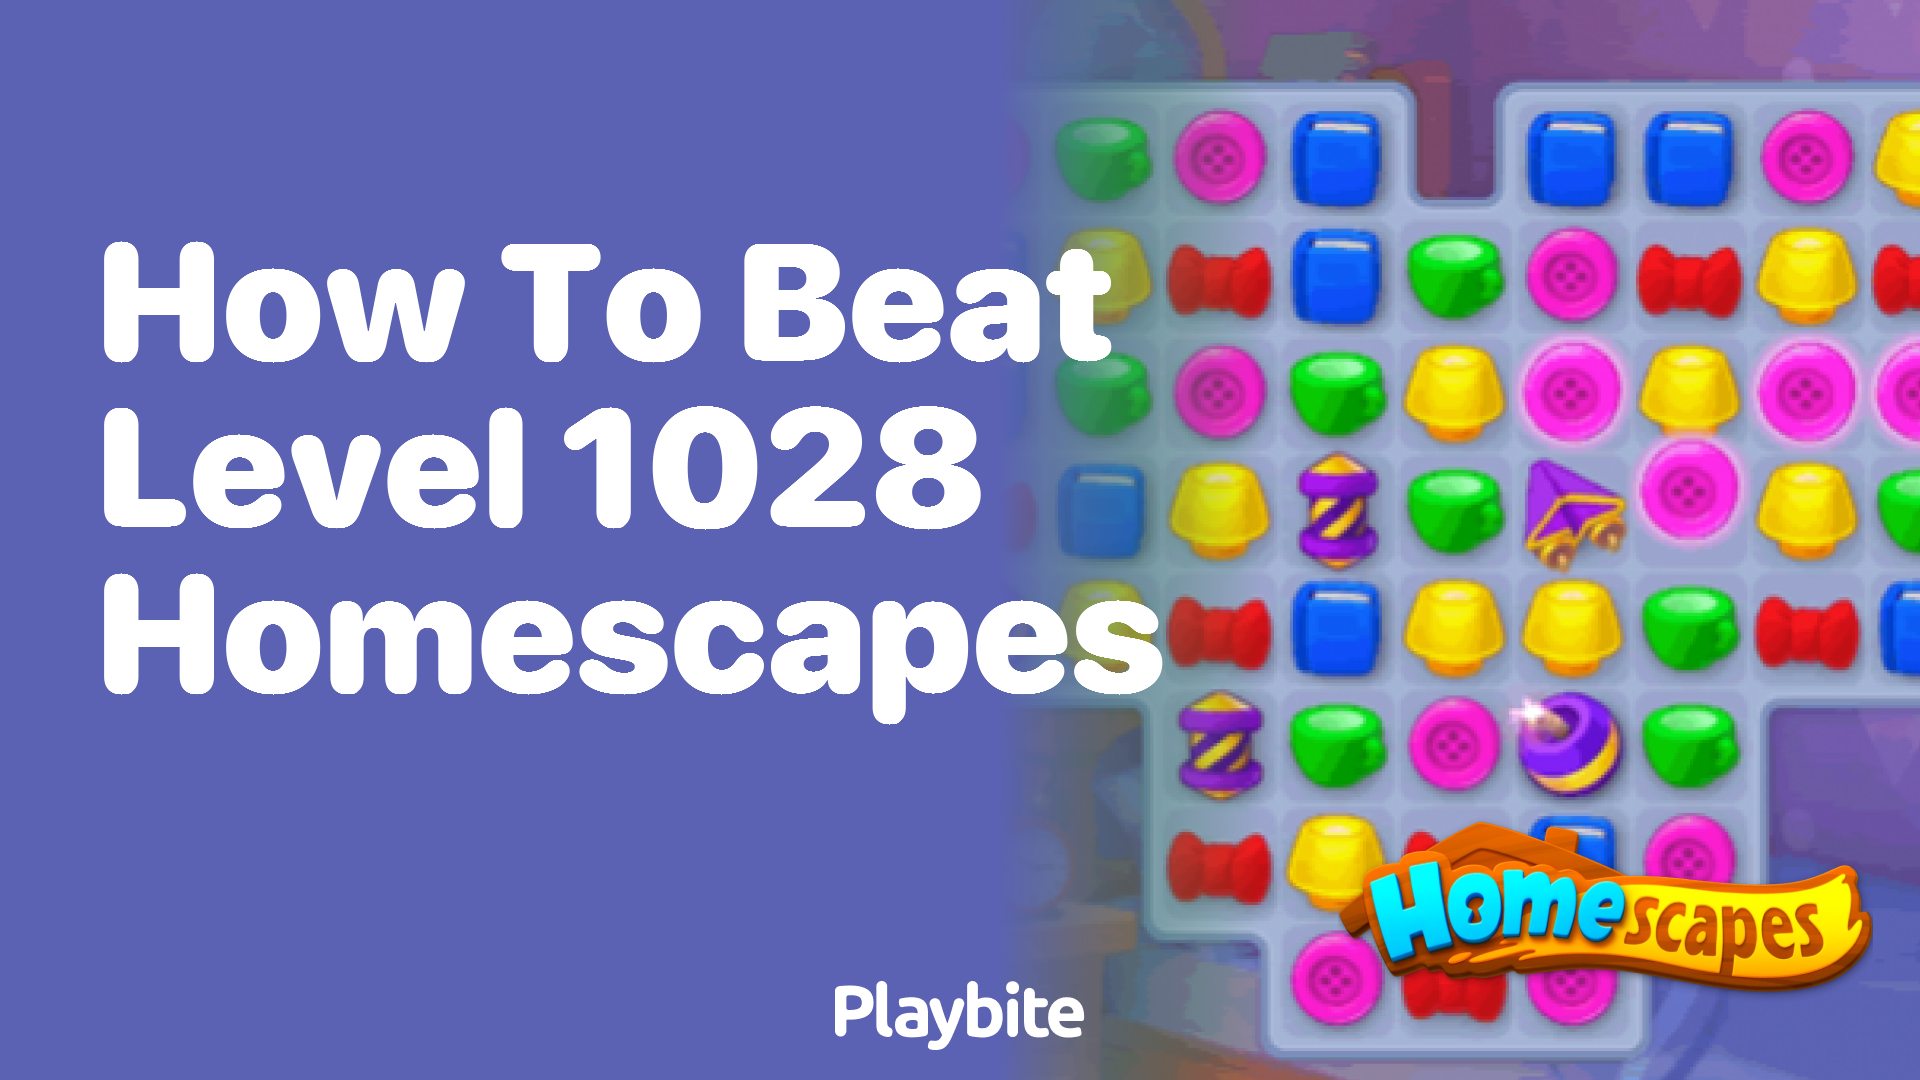 How to beat Level 1028 in Homescapes?